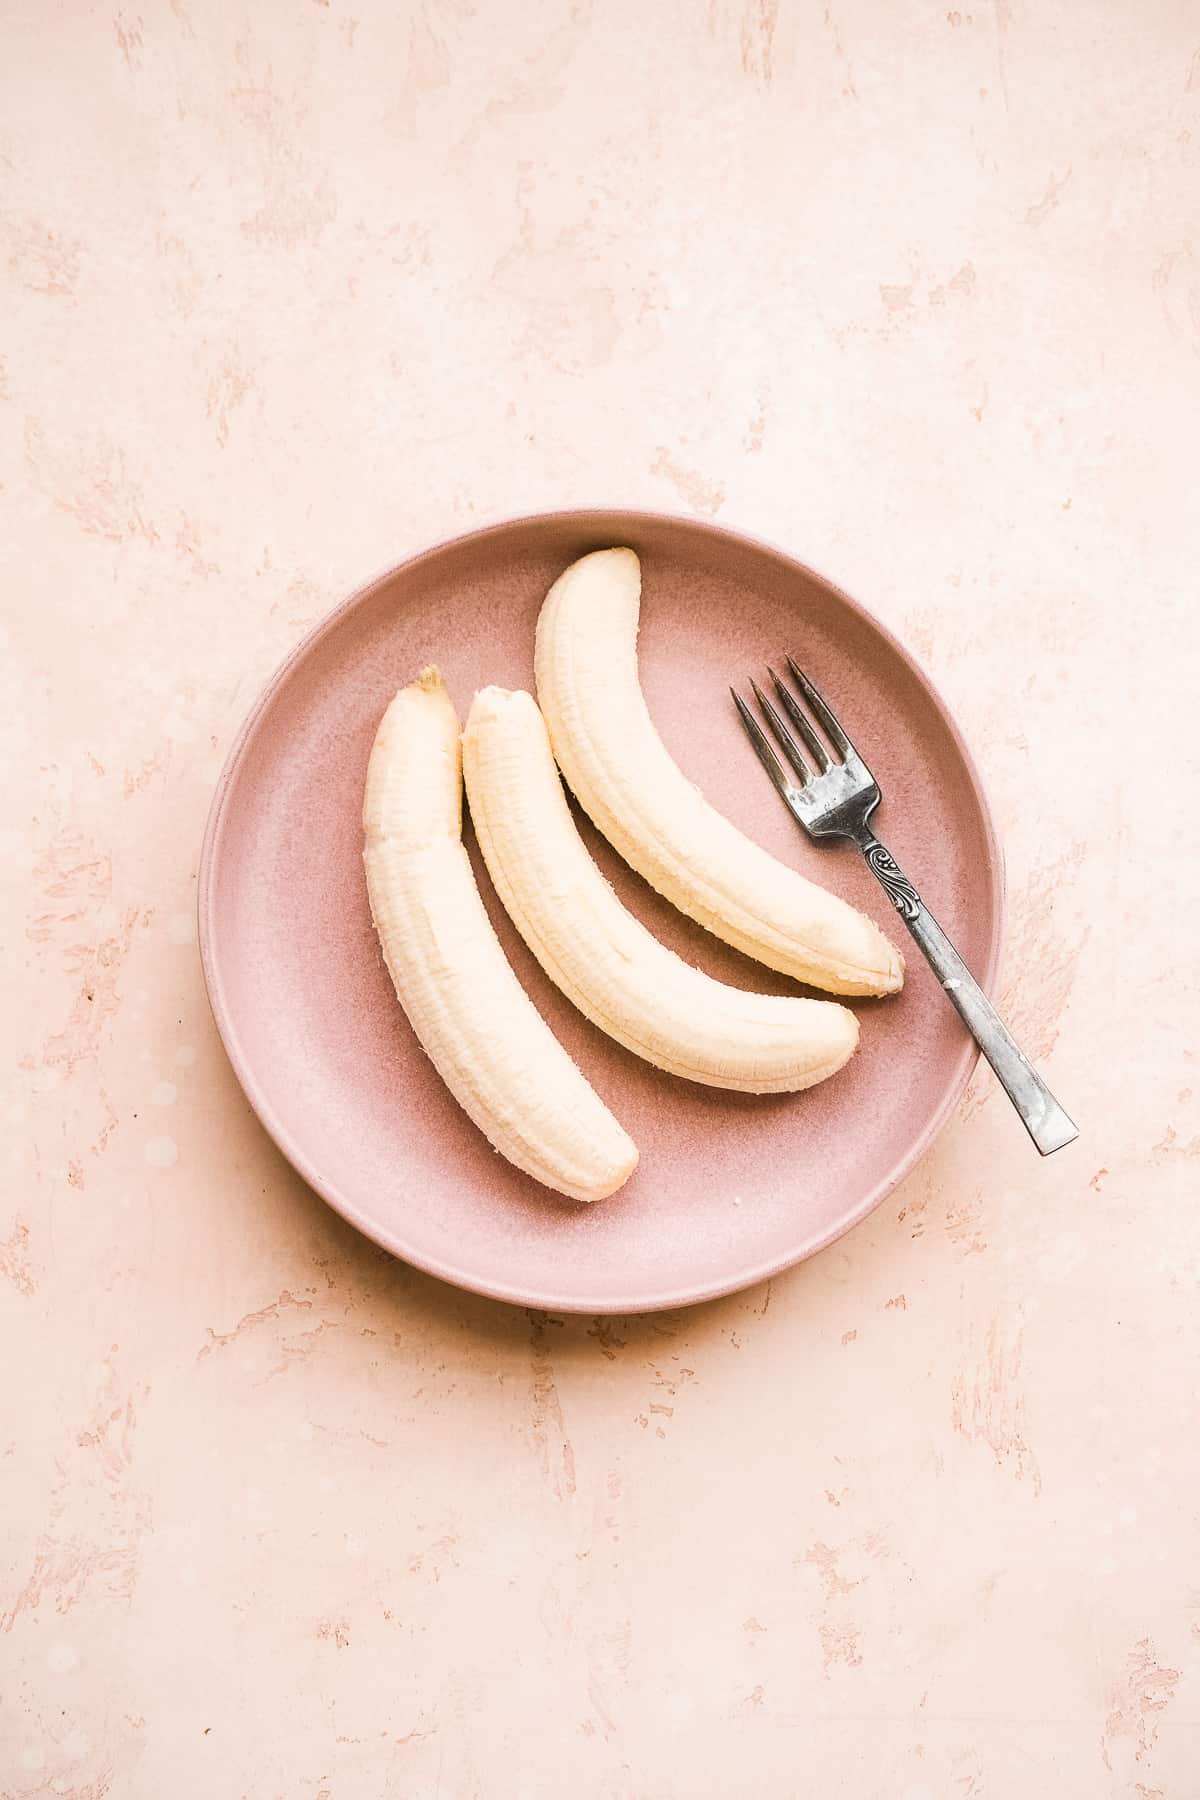 Three bananas on a pink plate with a fork on the side.